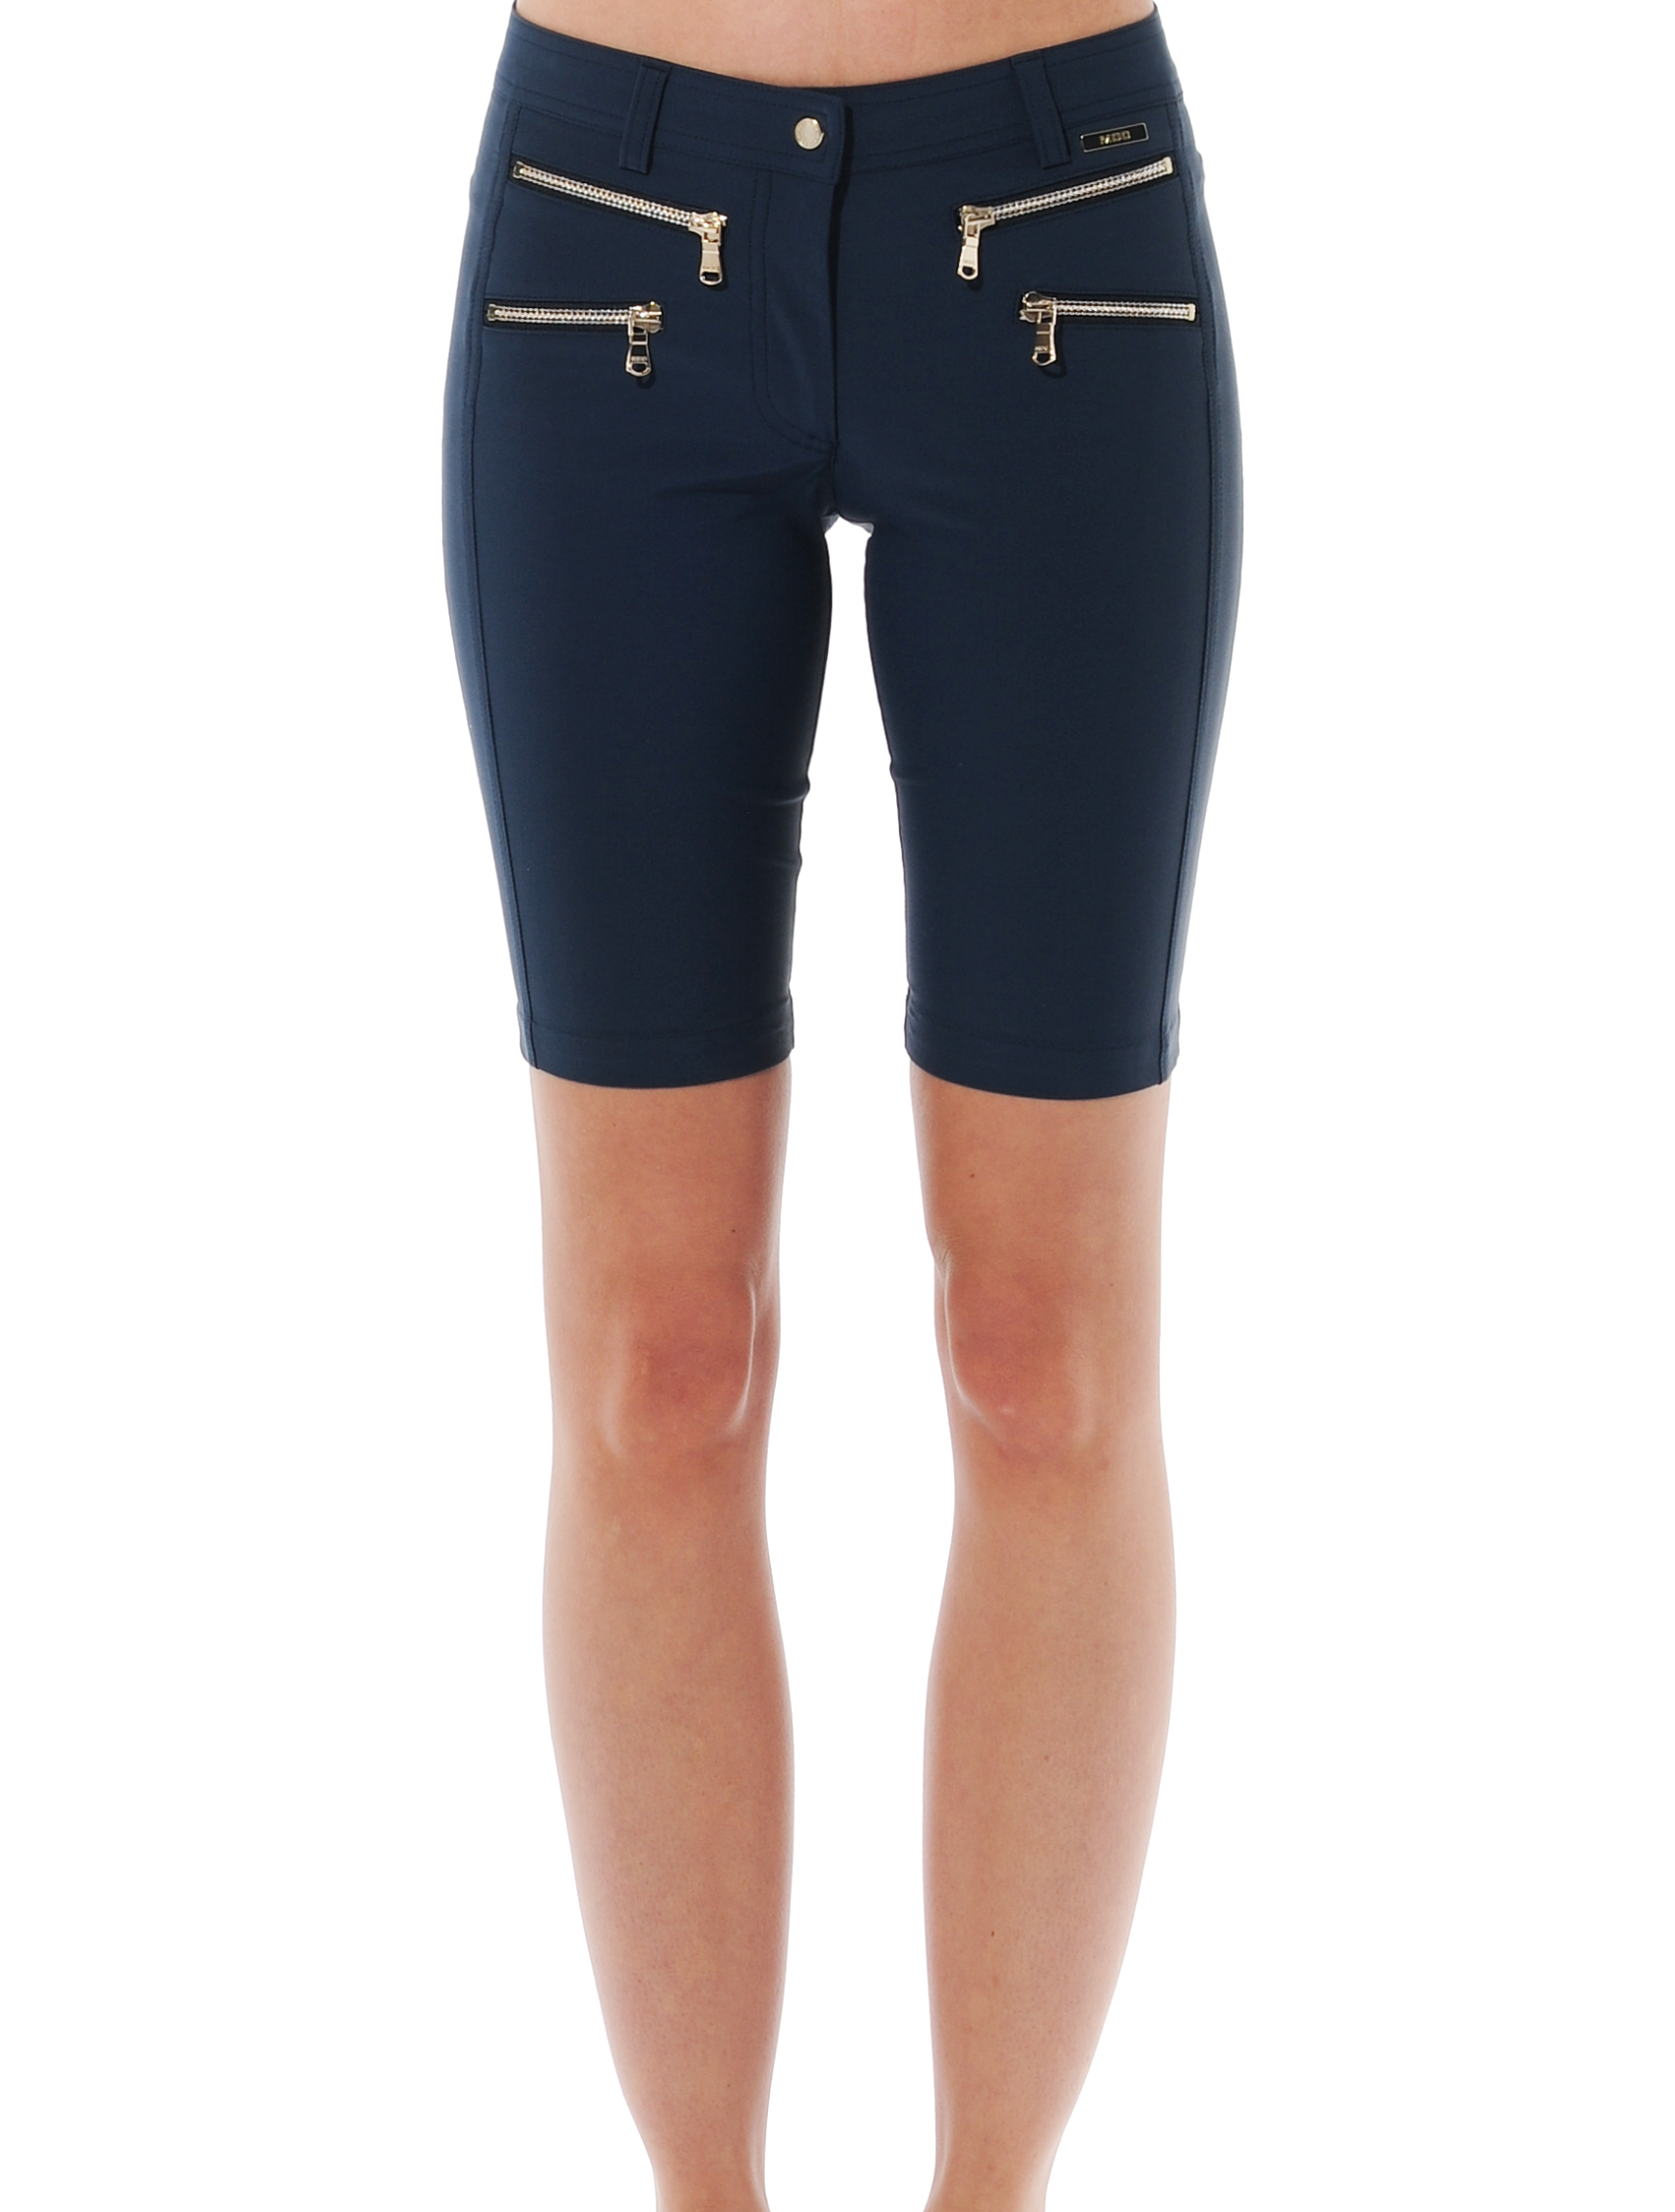 4way stretch double zip shorts navy 